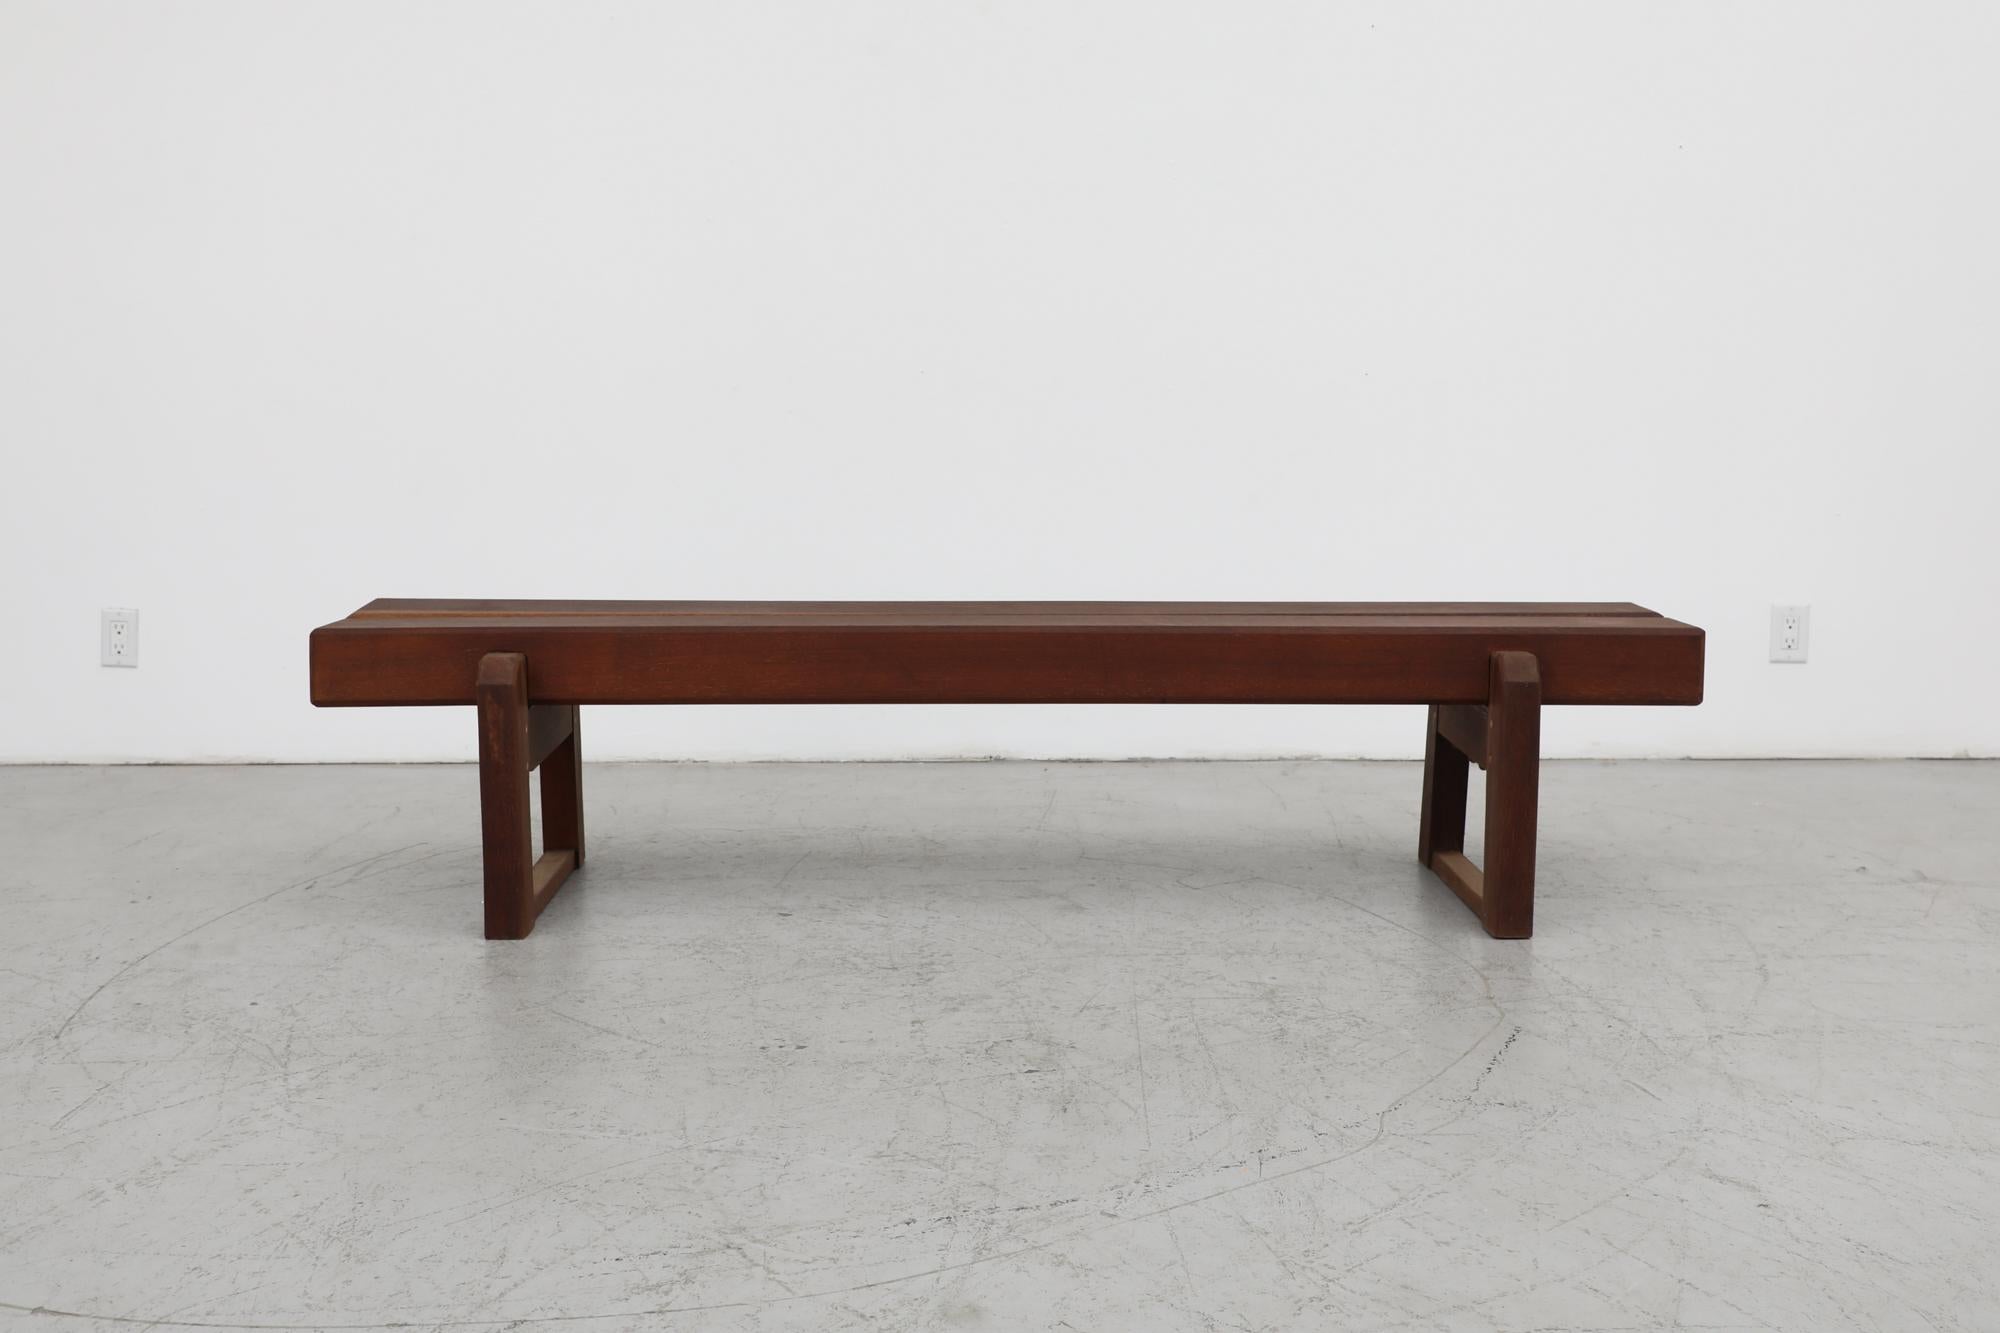 Brutalist, Mid-Century, extra long and extremely heavy solid wood bench. From outside of a library in Belgium. The bench is lightly sanded and hand waxed with visible patina and wear that is consistent with its age and use. This bench may vary